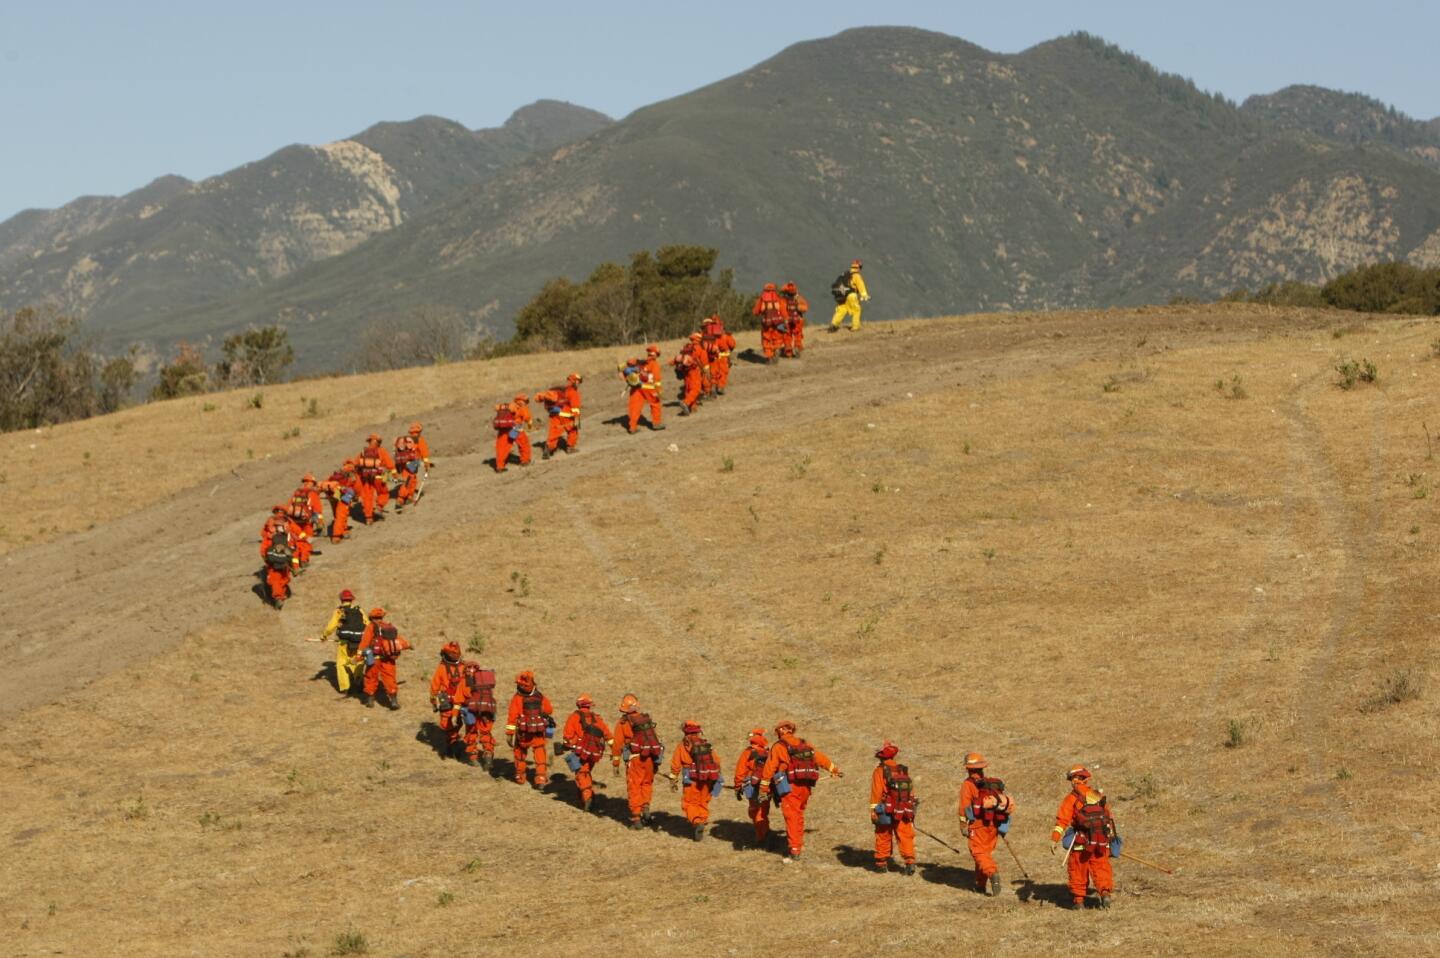 A firefighting hand crew marches into the hills as they mop up after the Fillmore fire in Ventura County, which was sparked Monday by a downed power line.